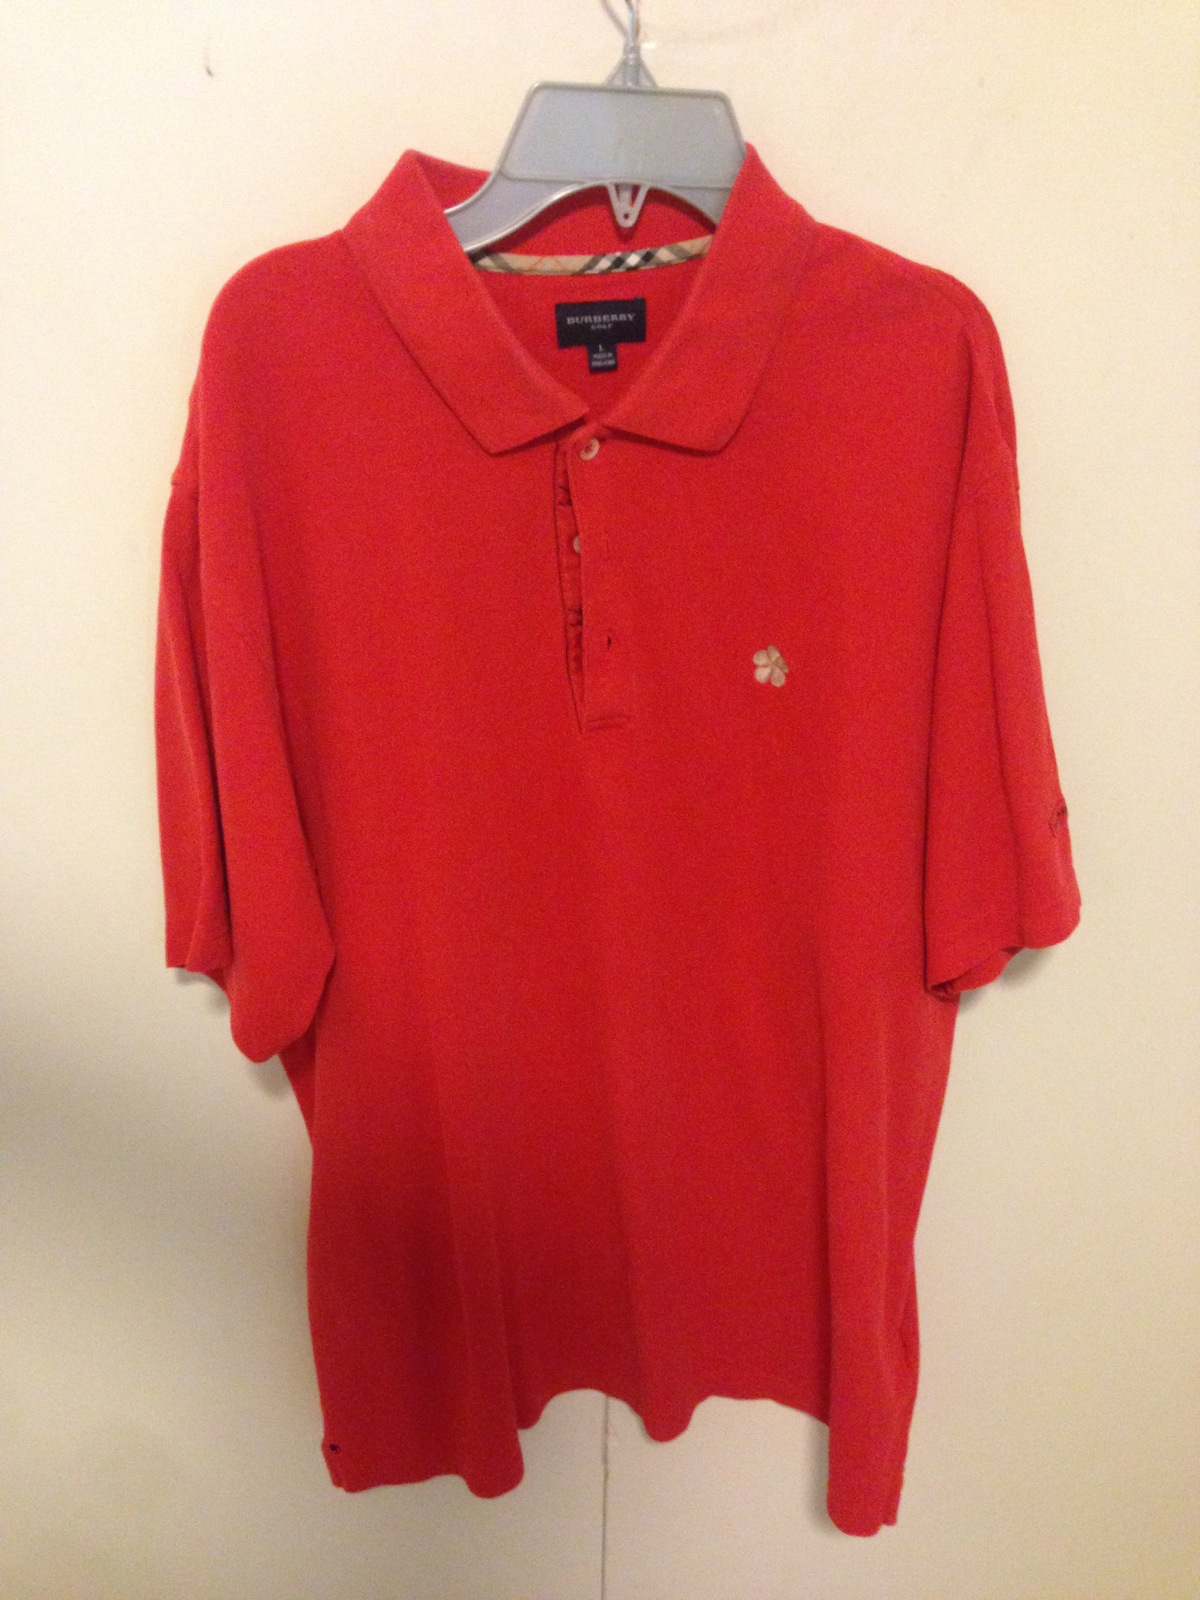 Primary image for   Vintage Burberry  golf polo mens shirt size  Large made in Hong Kong